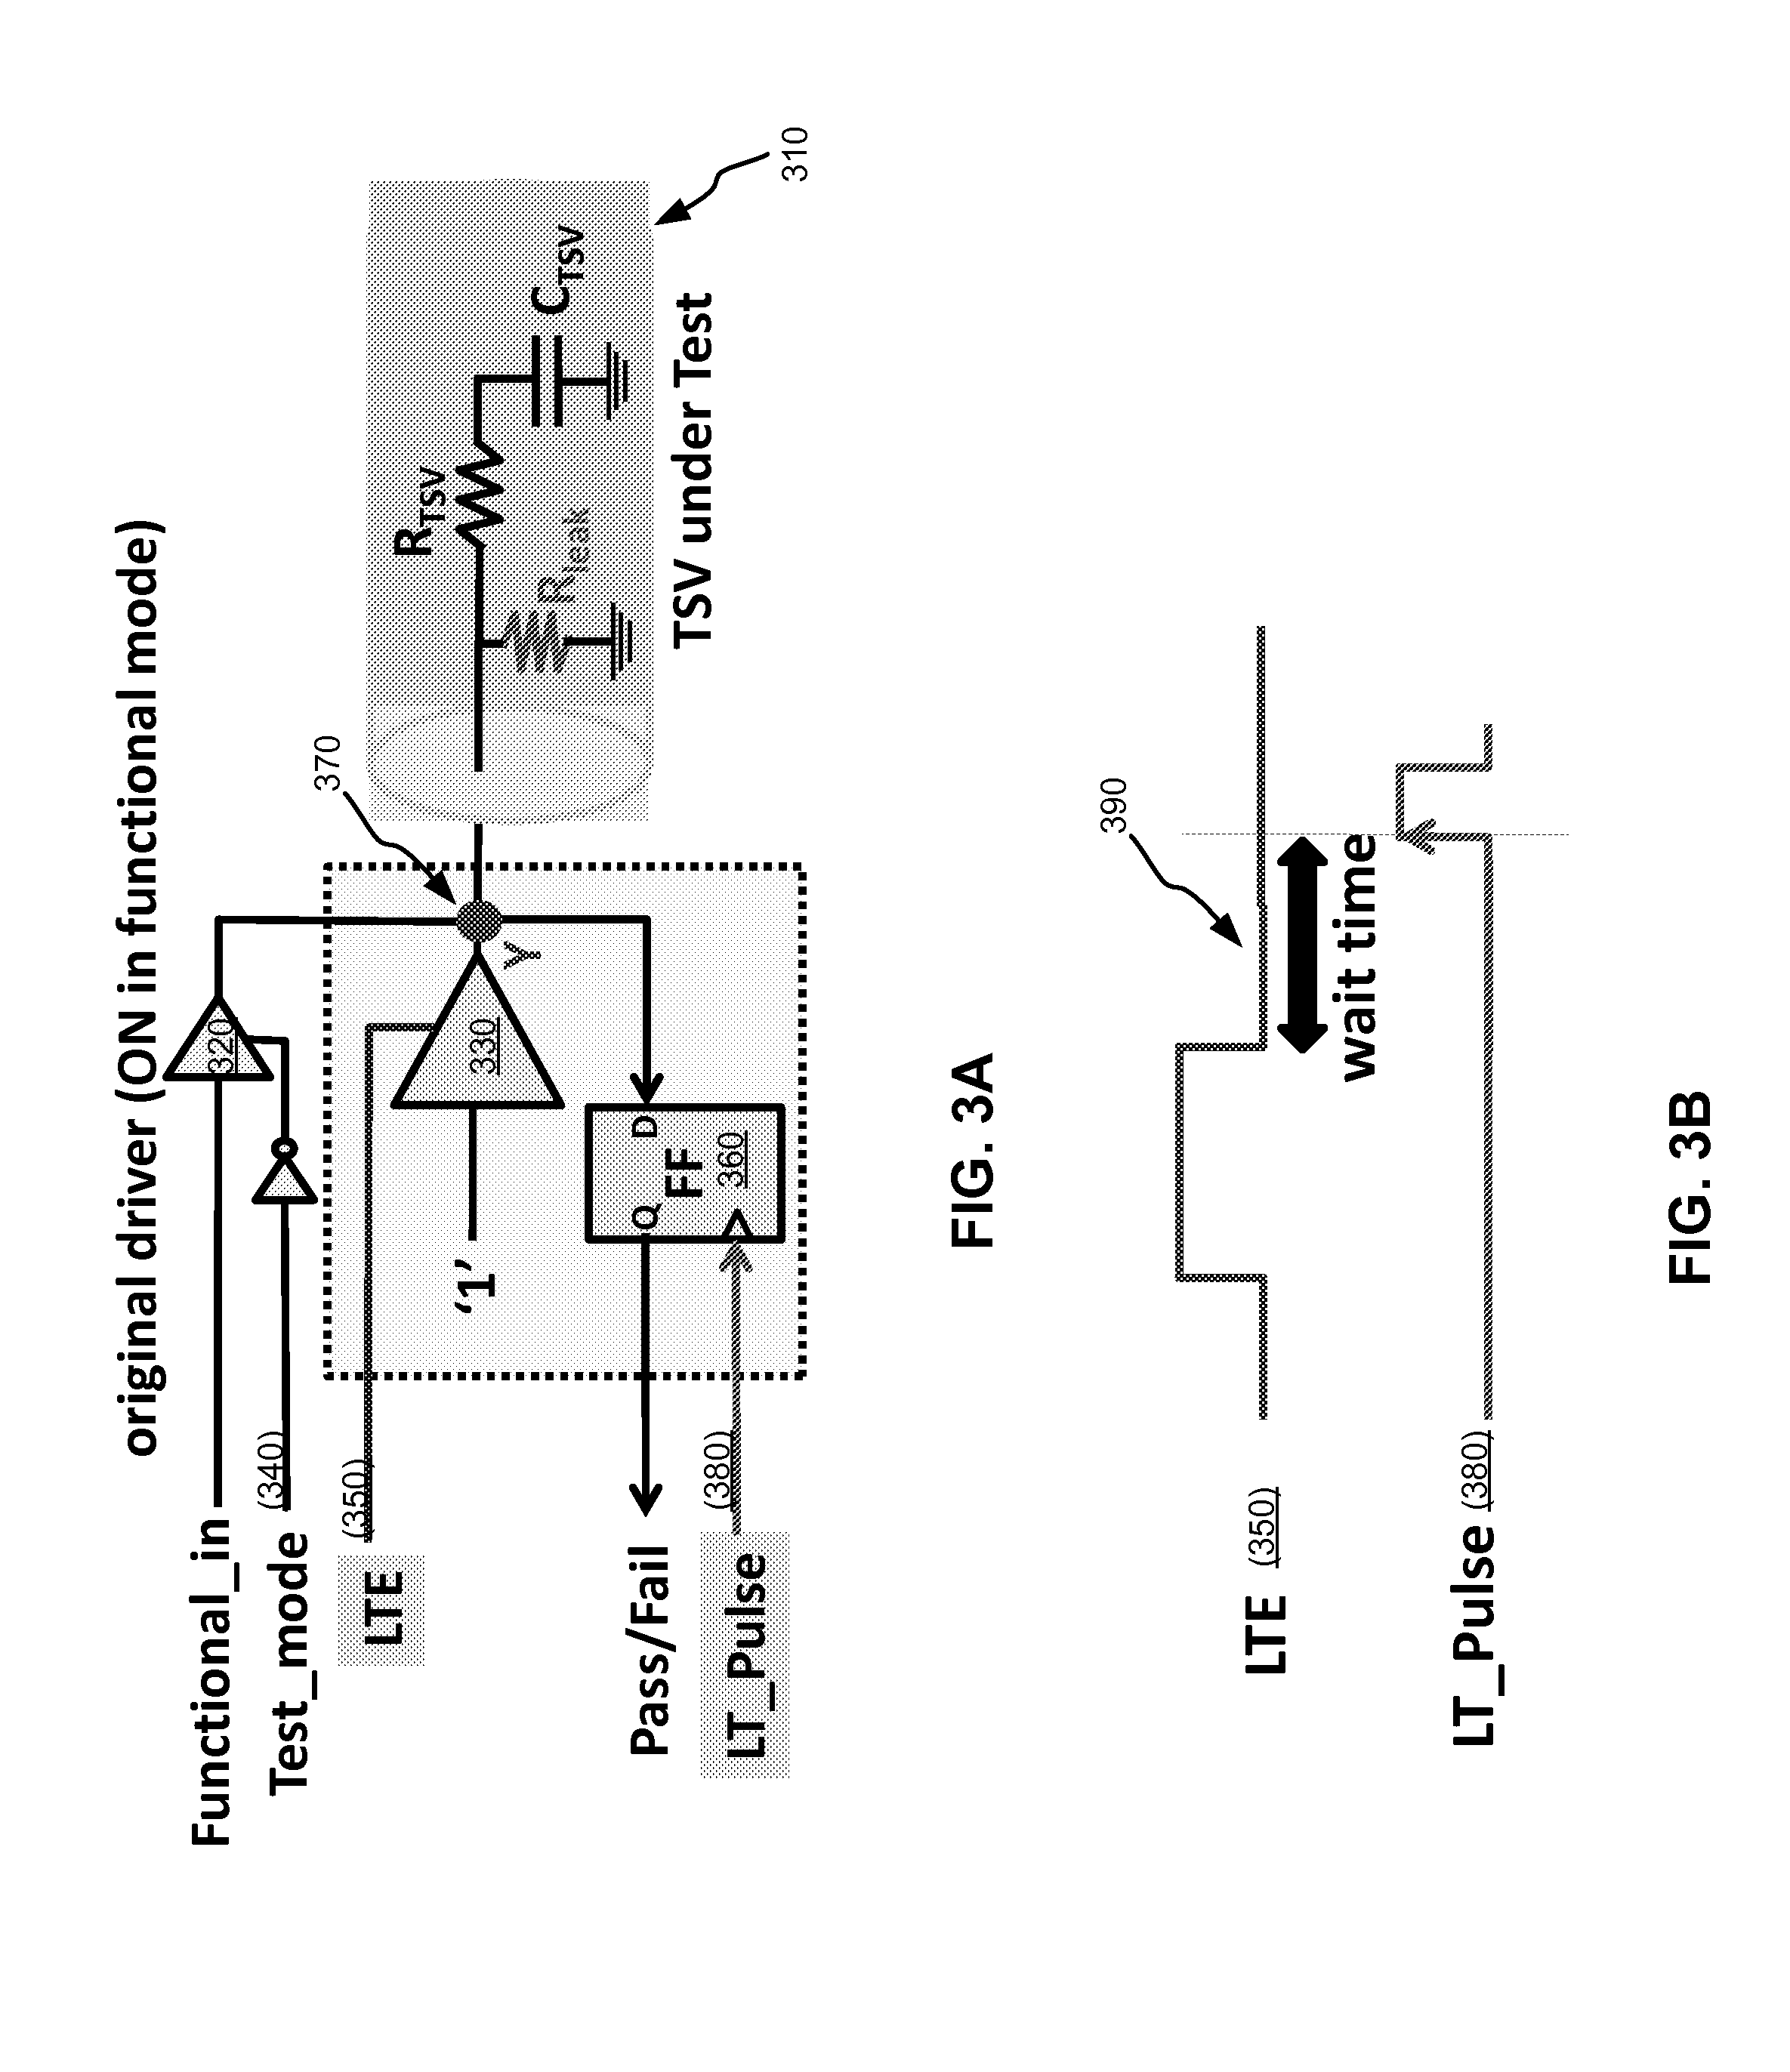 Programmable Leakage Test For Interconnects In Stacked Designs